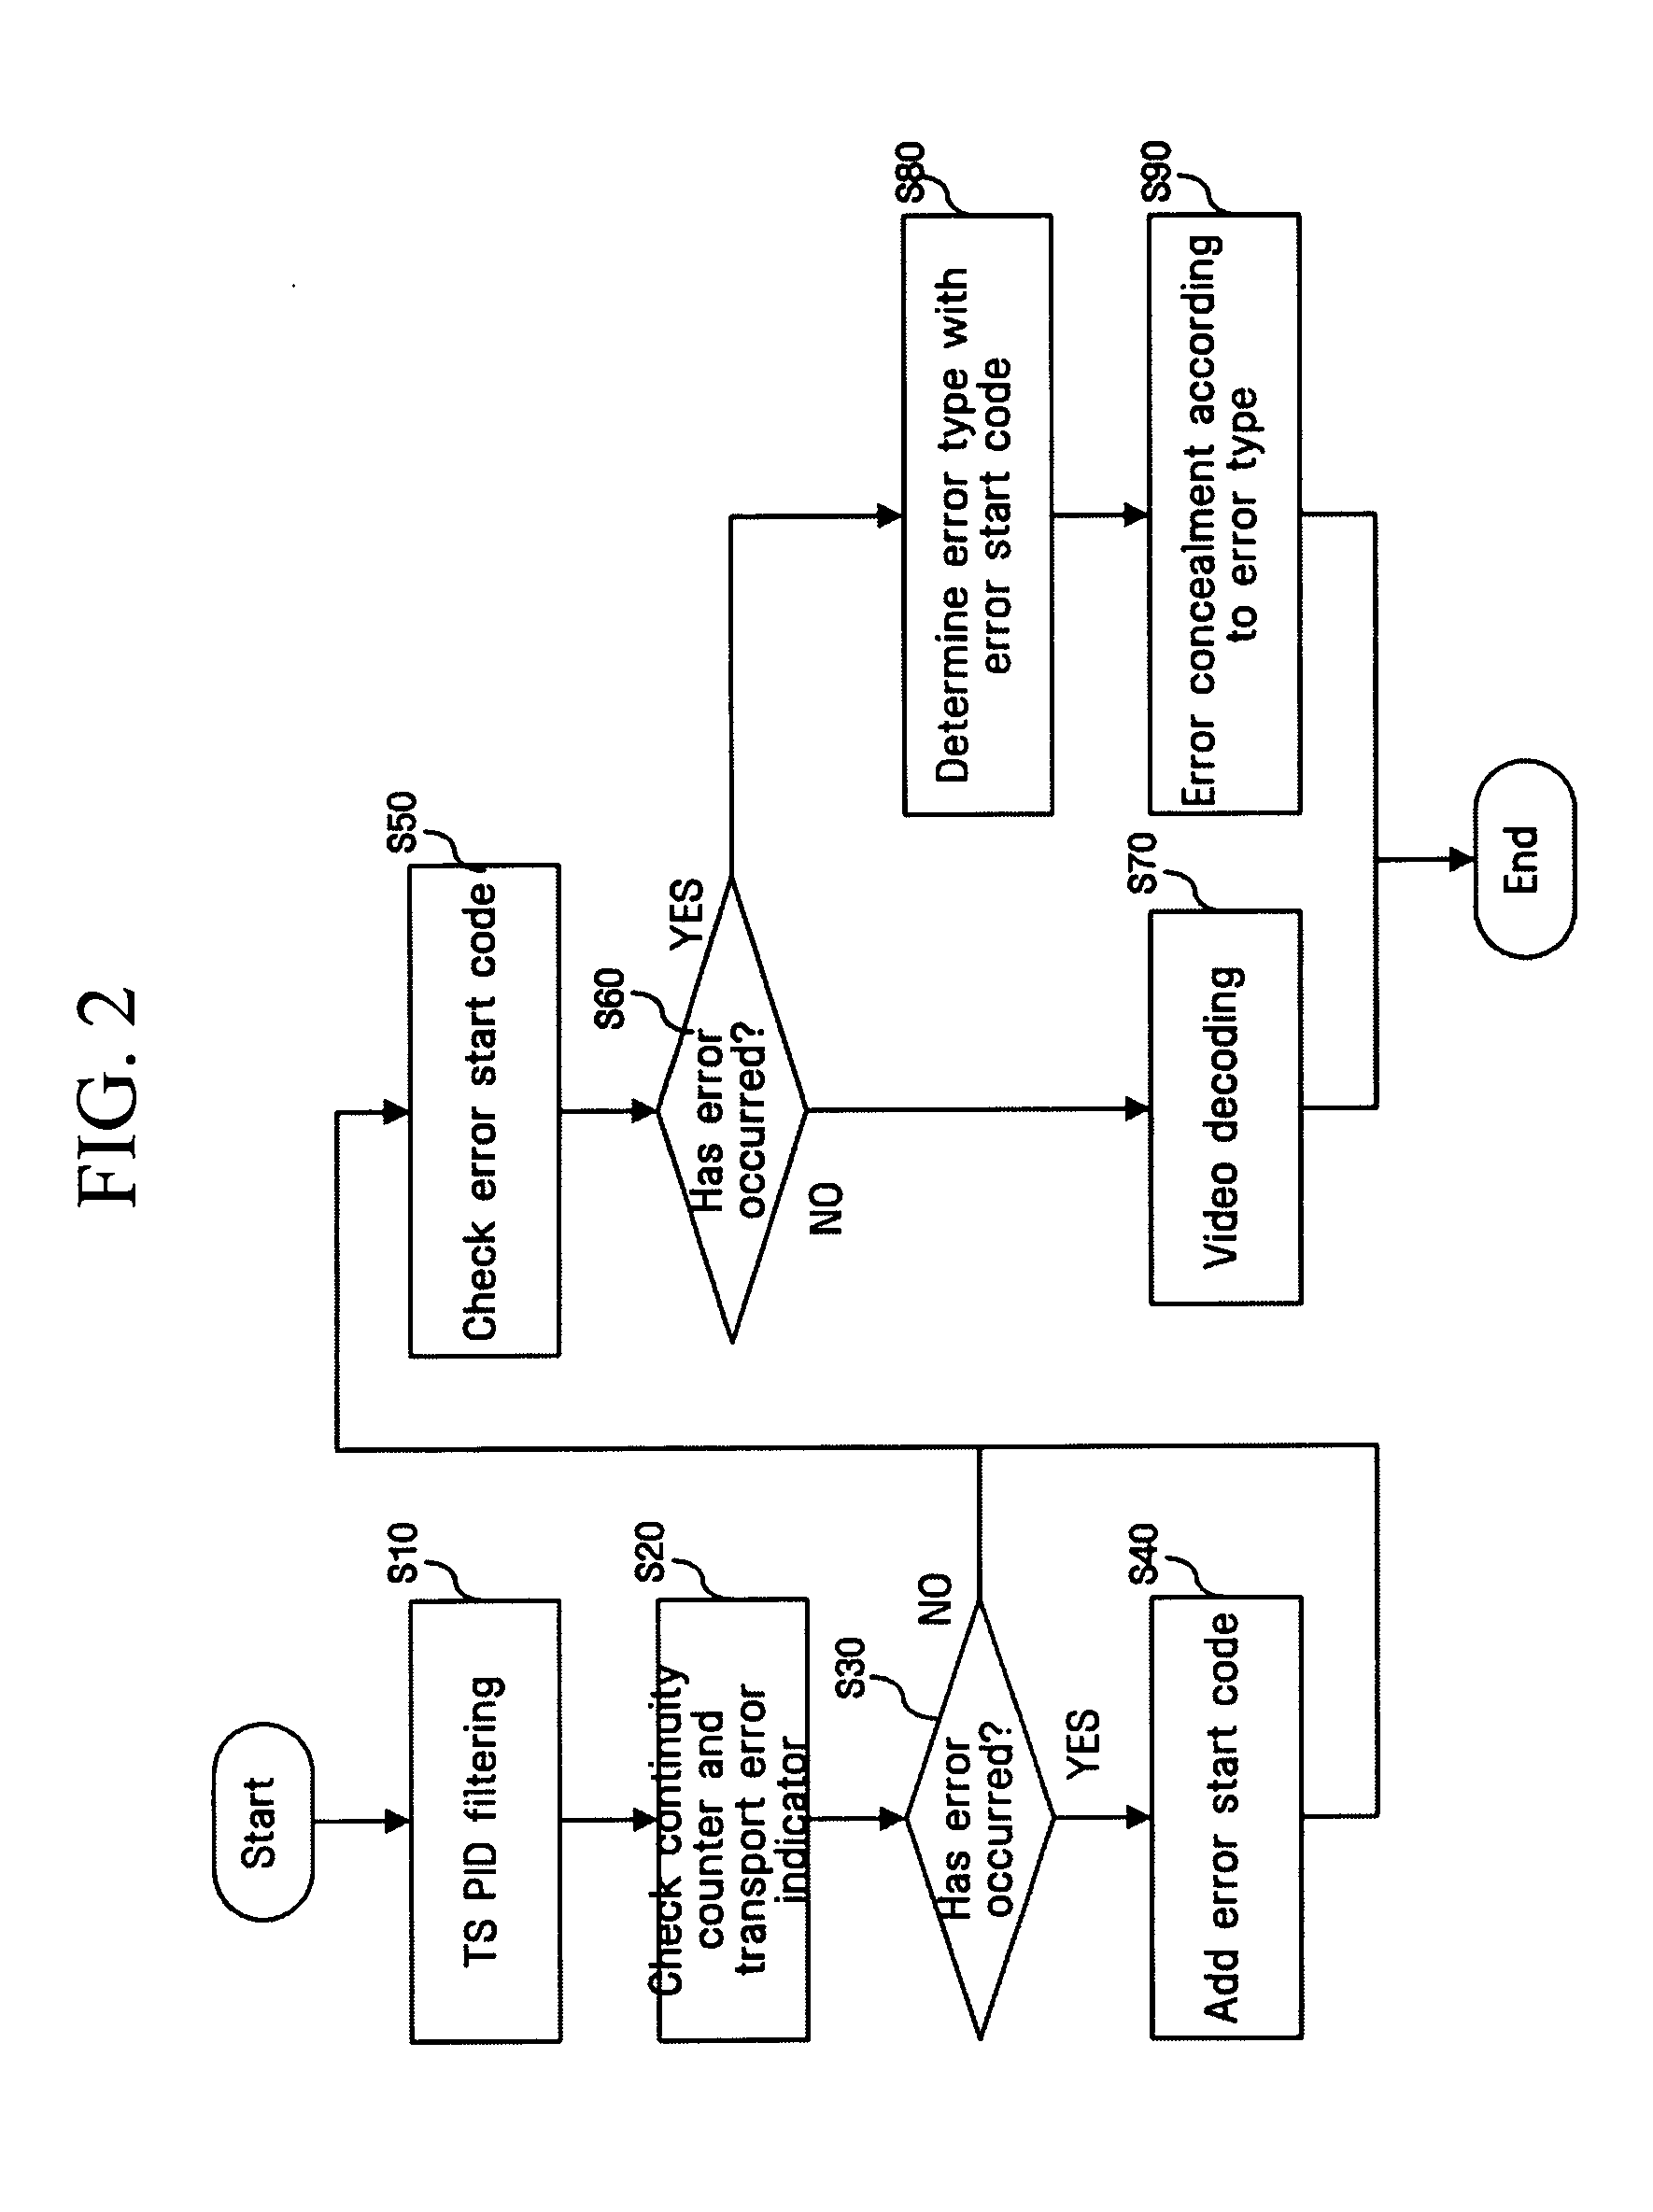 Video decoding method and apparatus for providing error detection